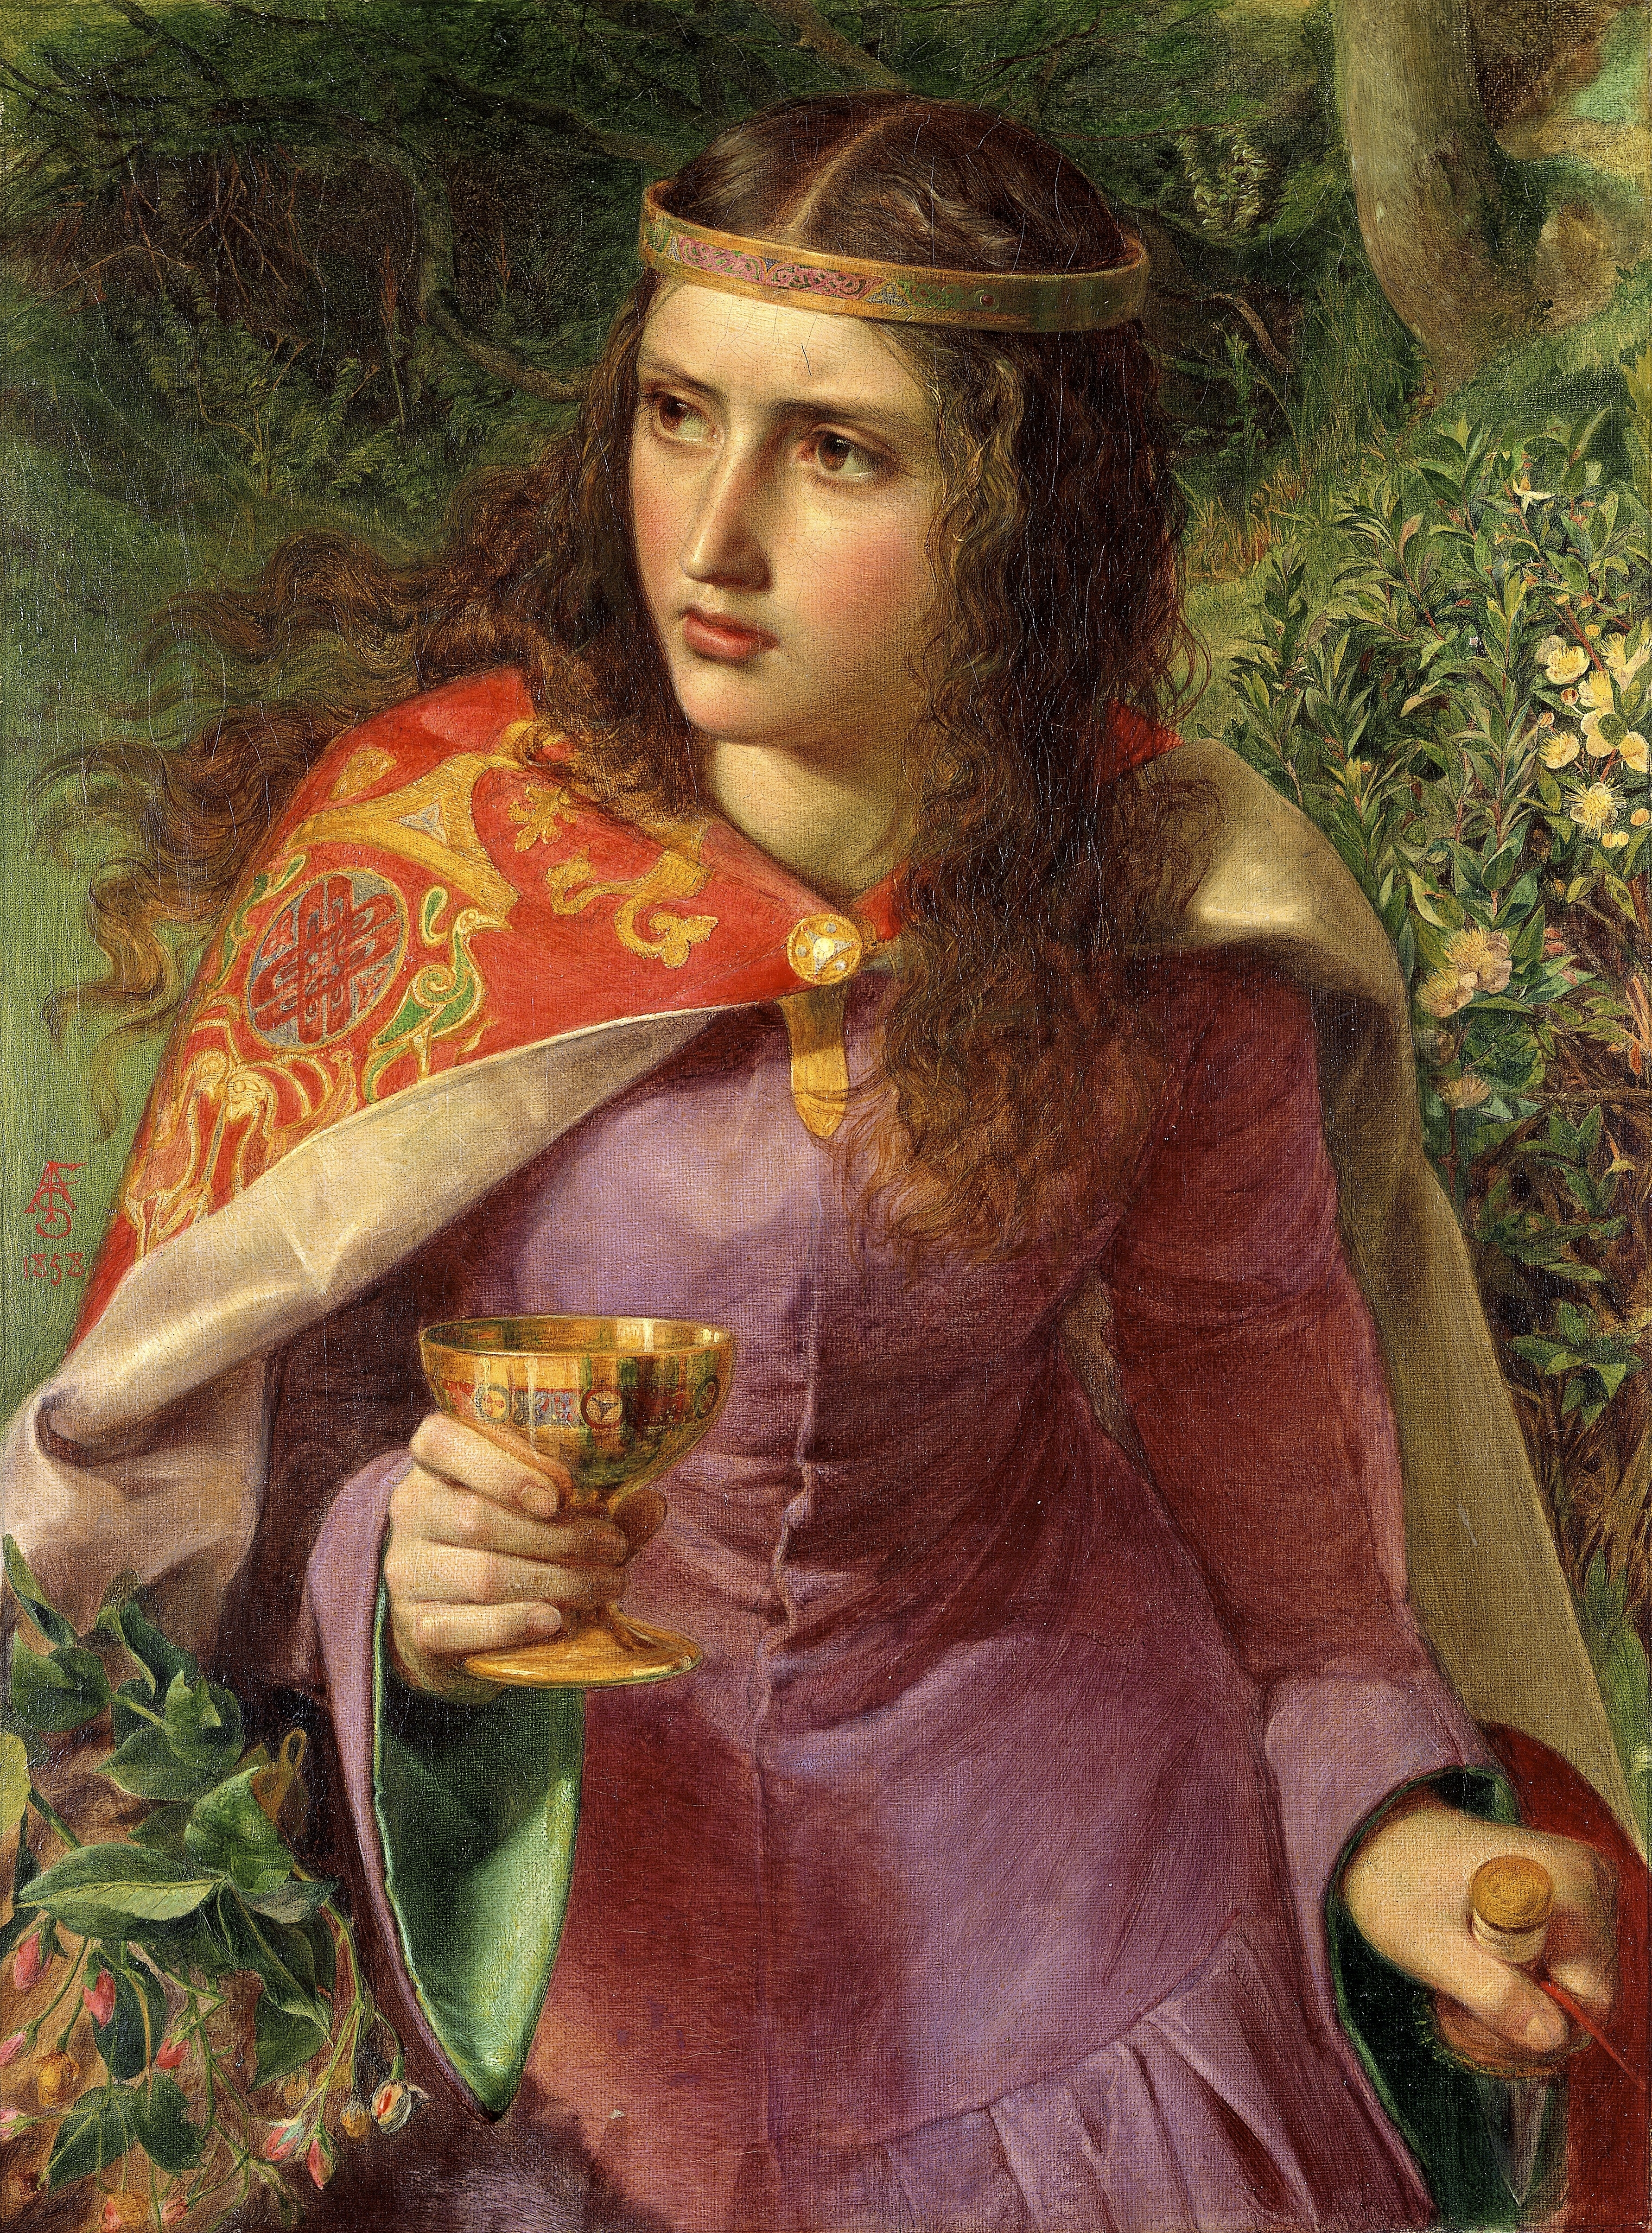 Painting of a medieval woman holding a chalice, adorned with a red robe and circlet